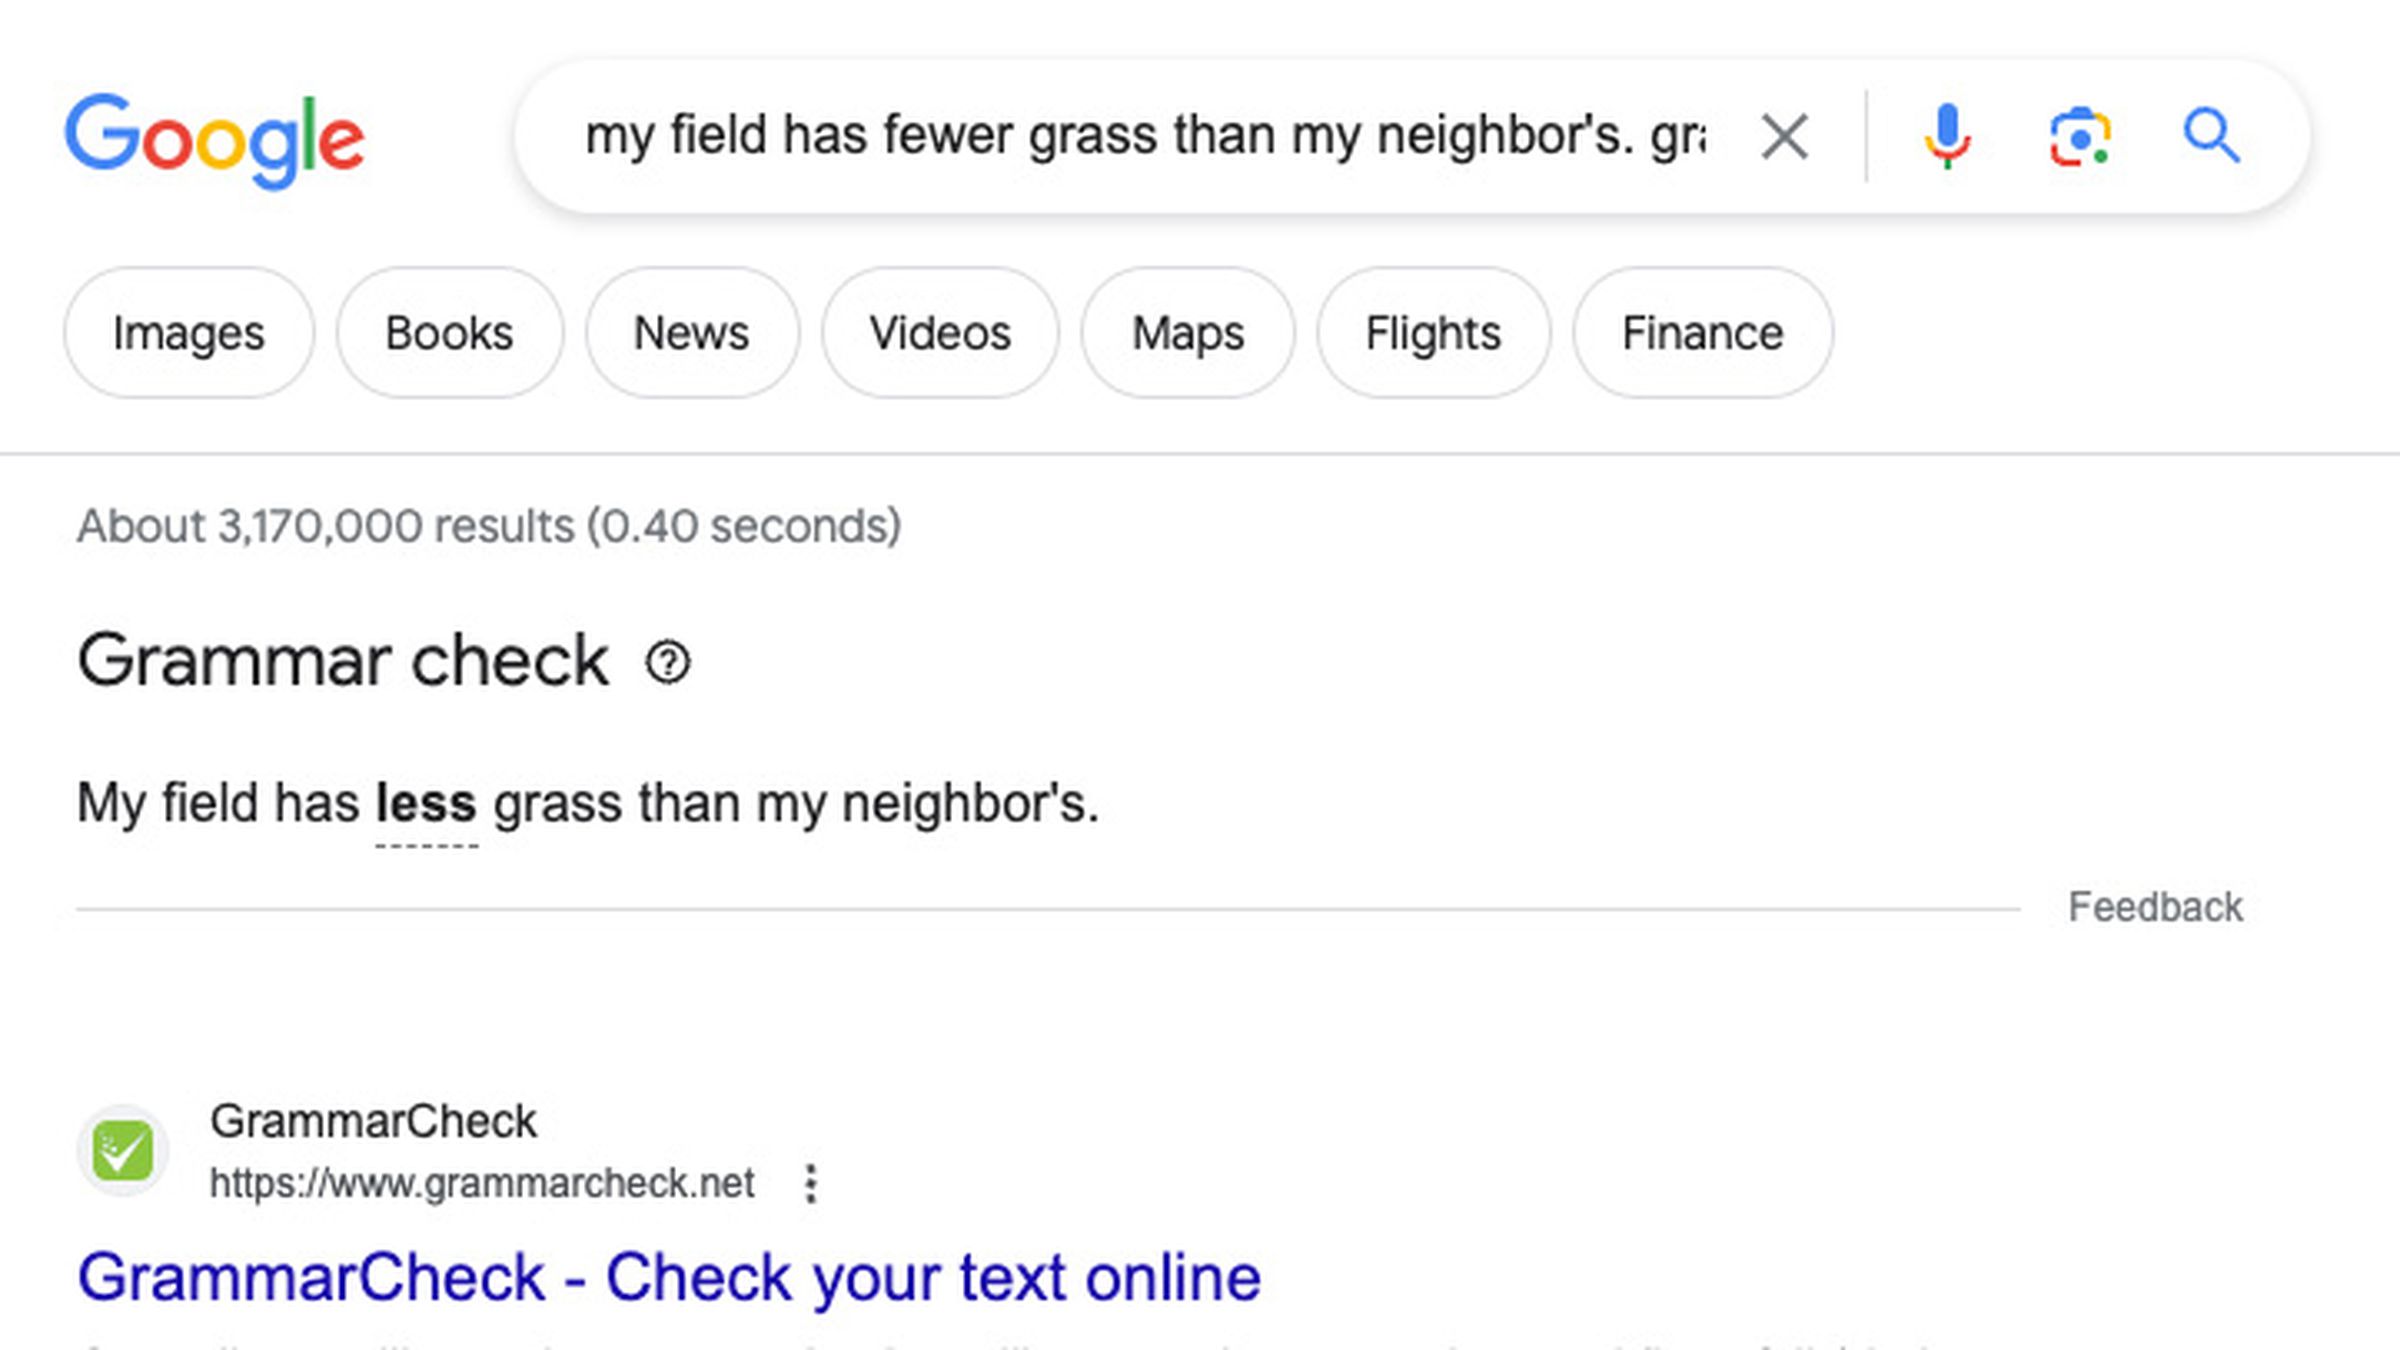 A google search for “my field has fewer grass than my neighbor’s. grammar check”